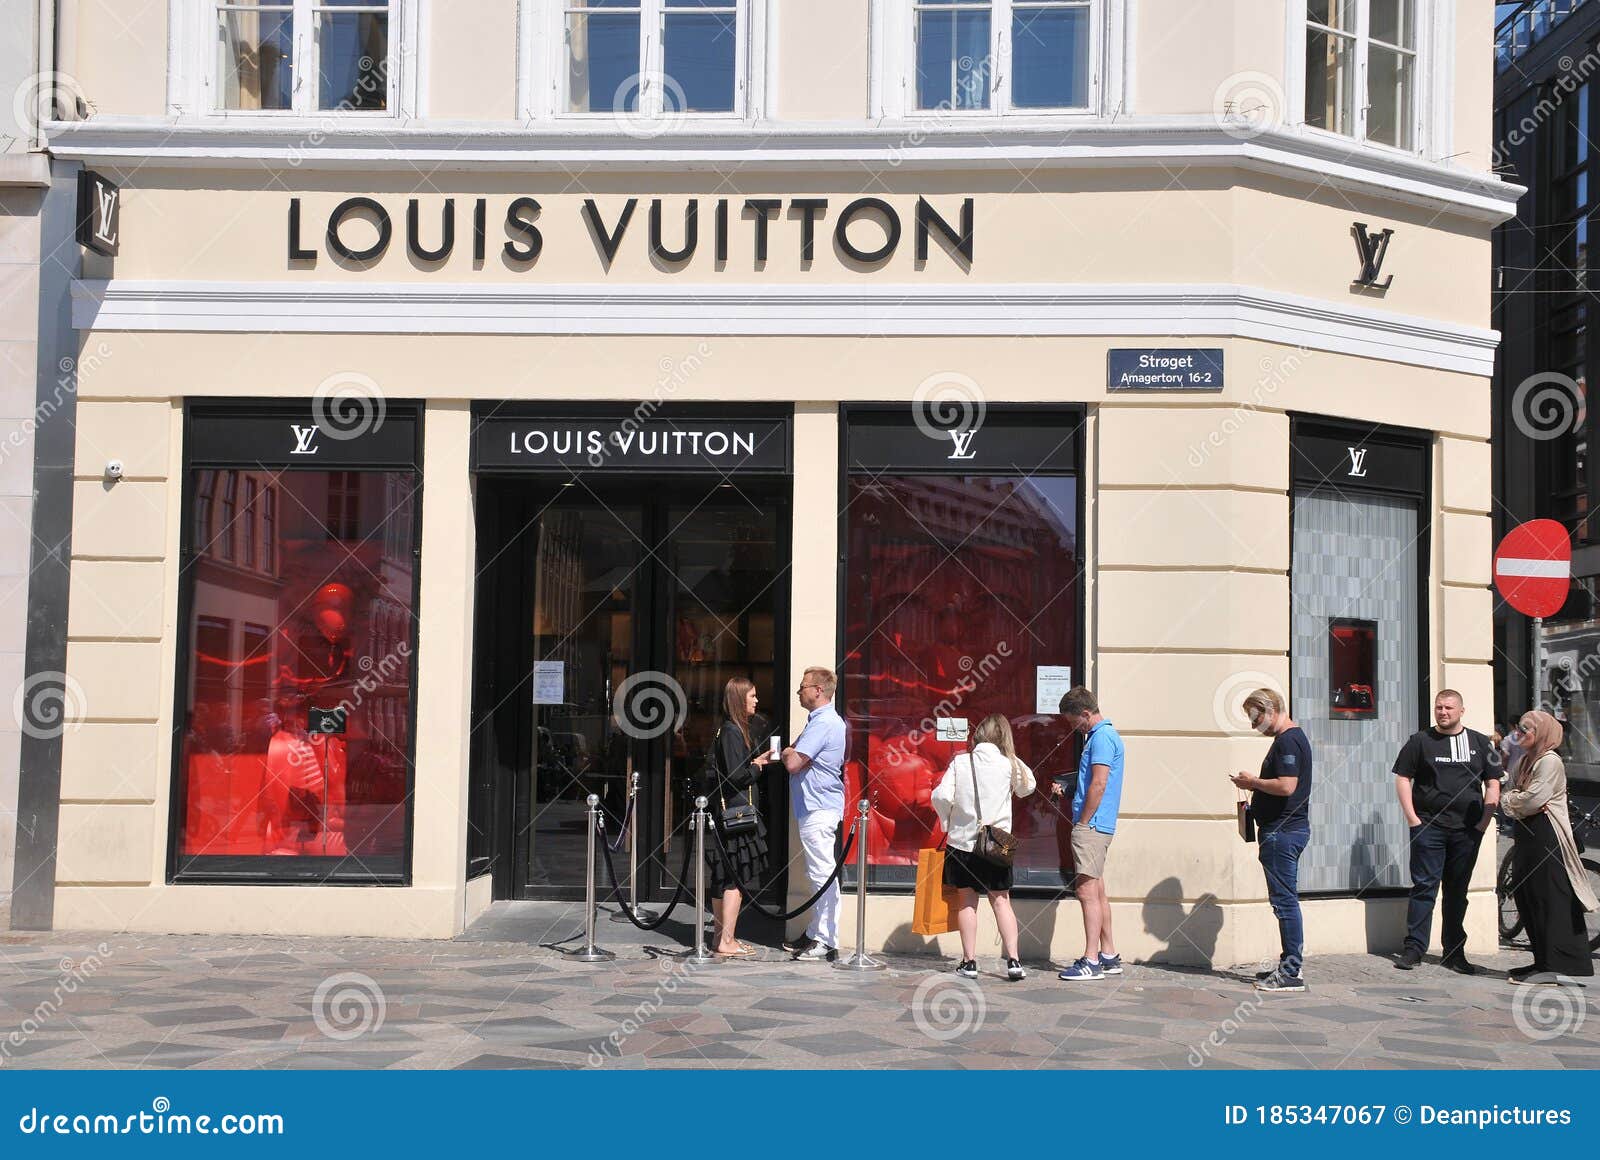 CONSUMERS WAITING in LINE at LOUIS VUITTON STORE Editorial Photography -  Image of europa, europe: 185347067